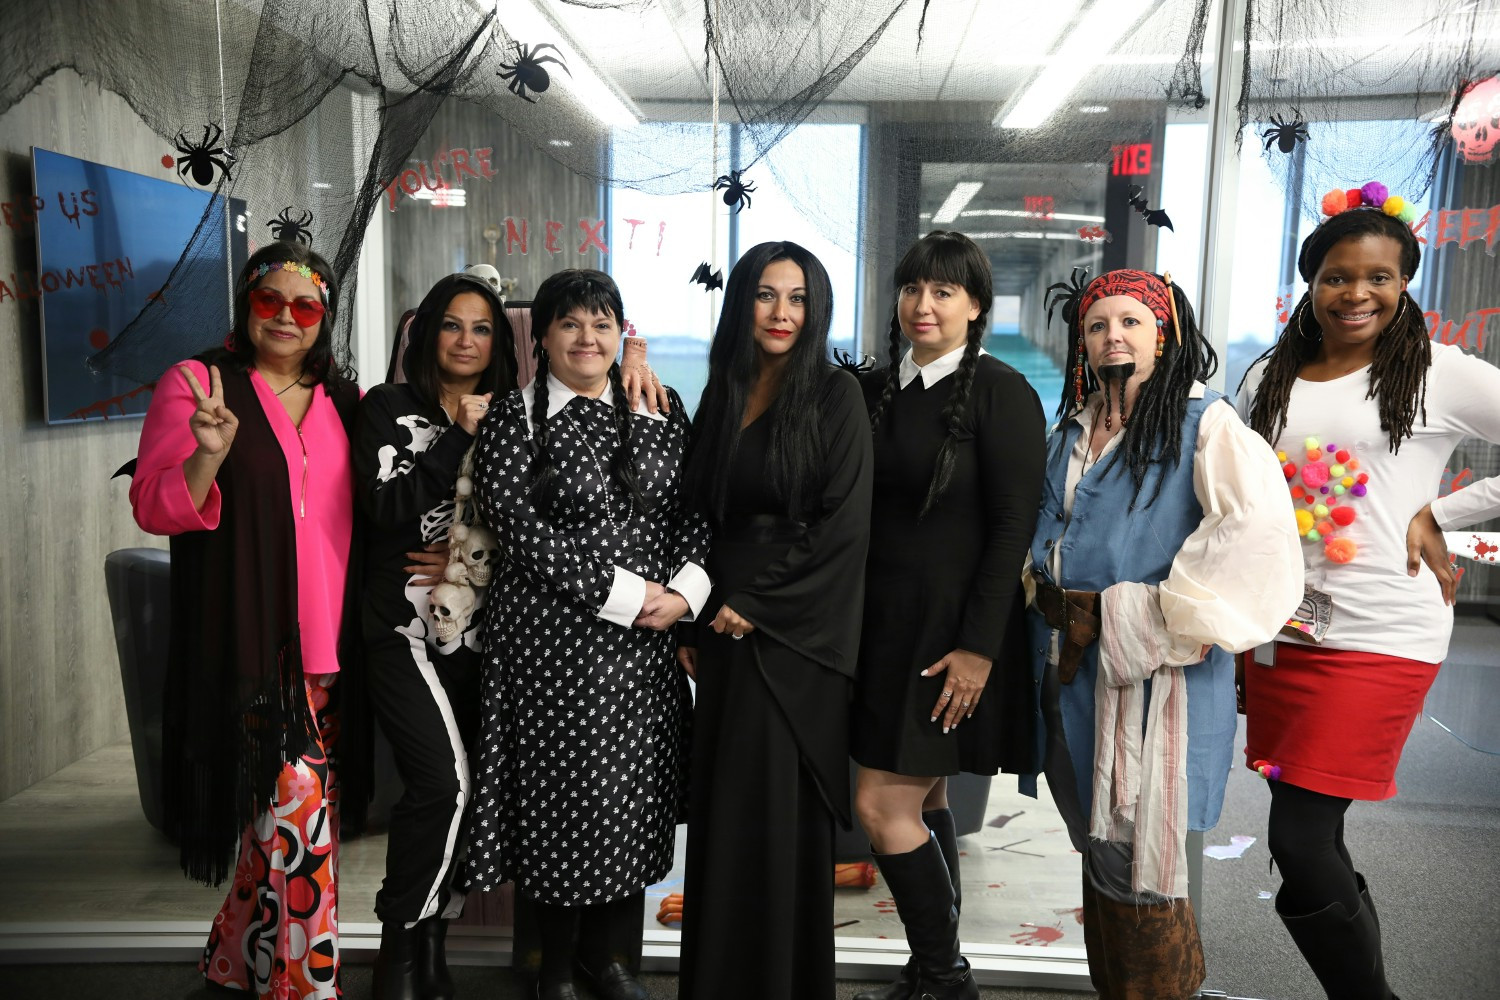 Every year our team brings the Halloween spirit to life with their amazing costumes! 